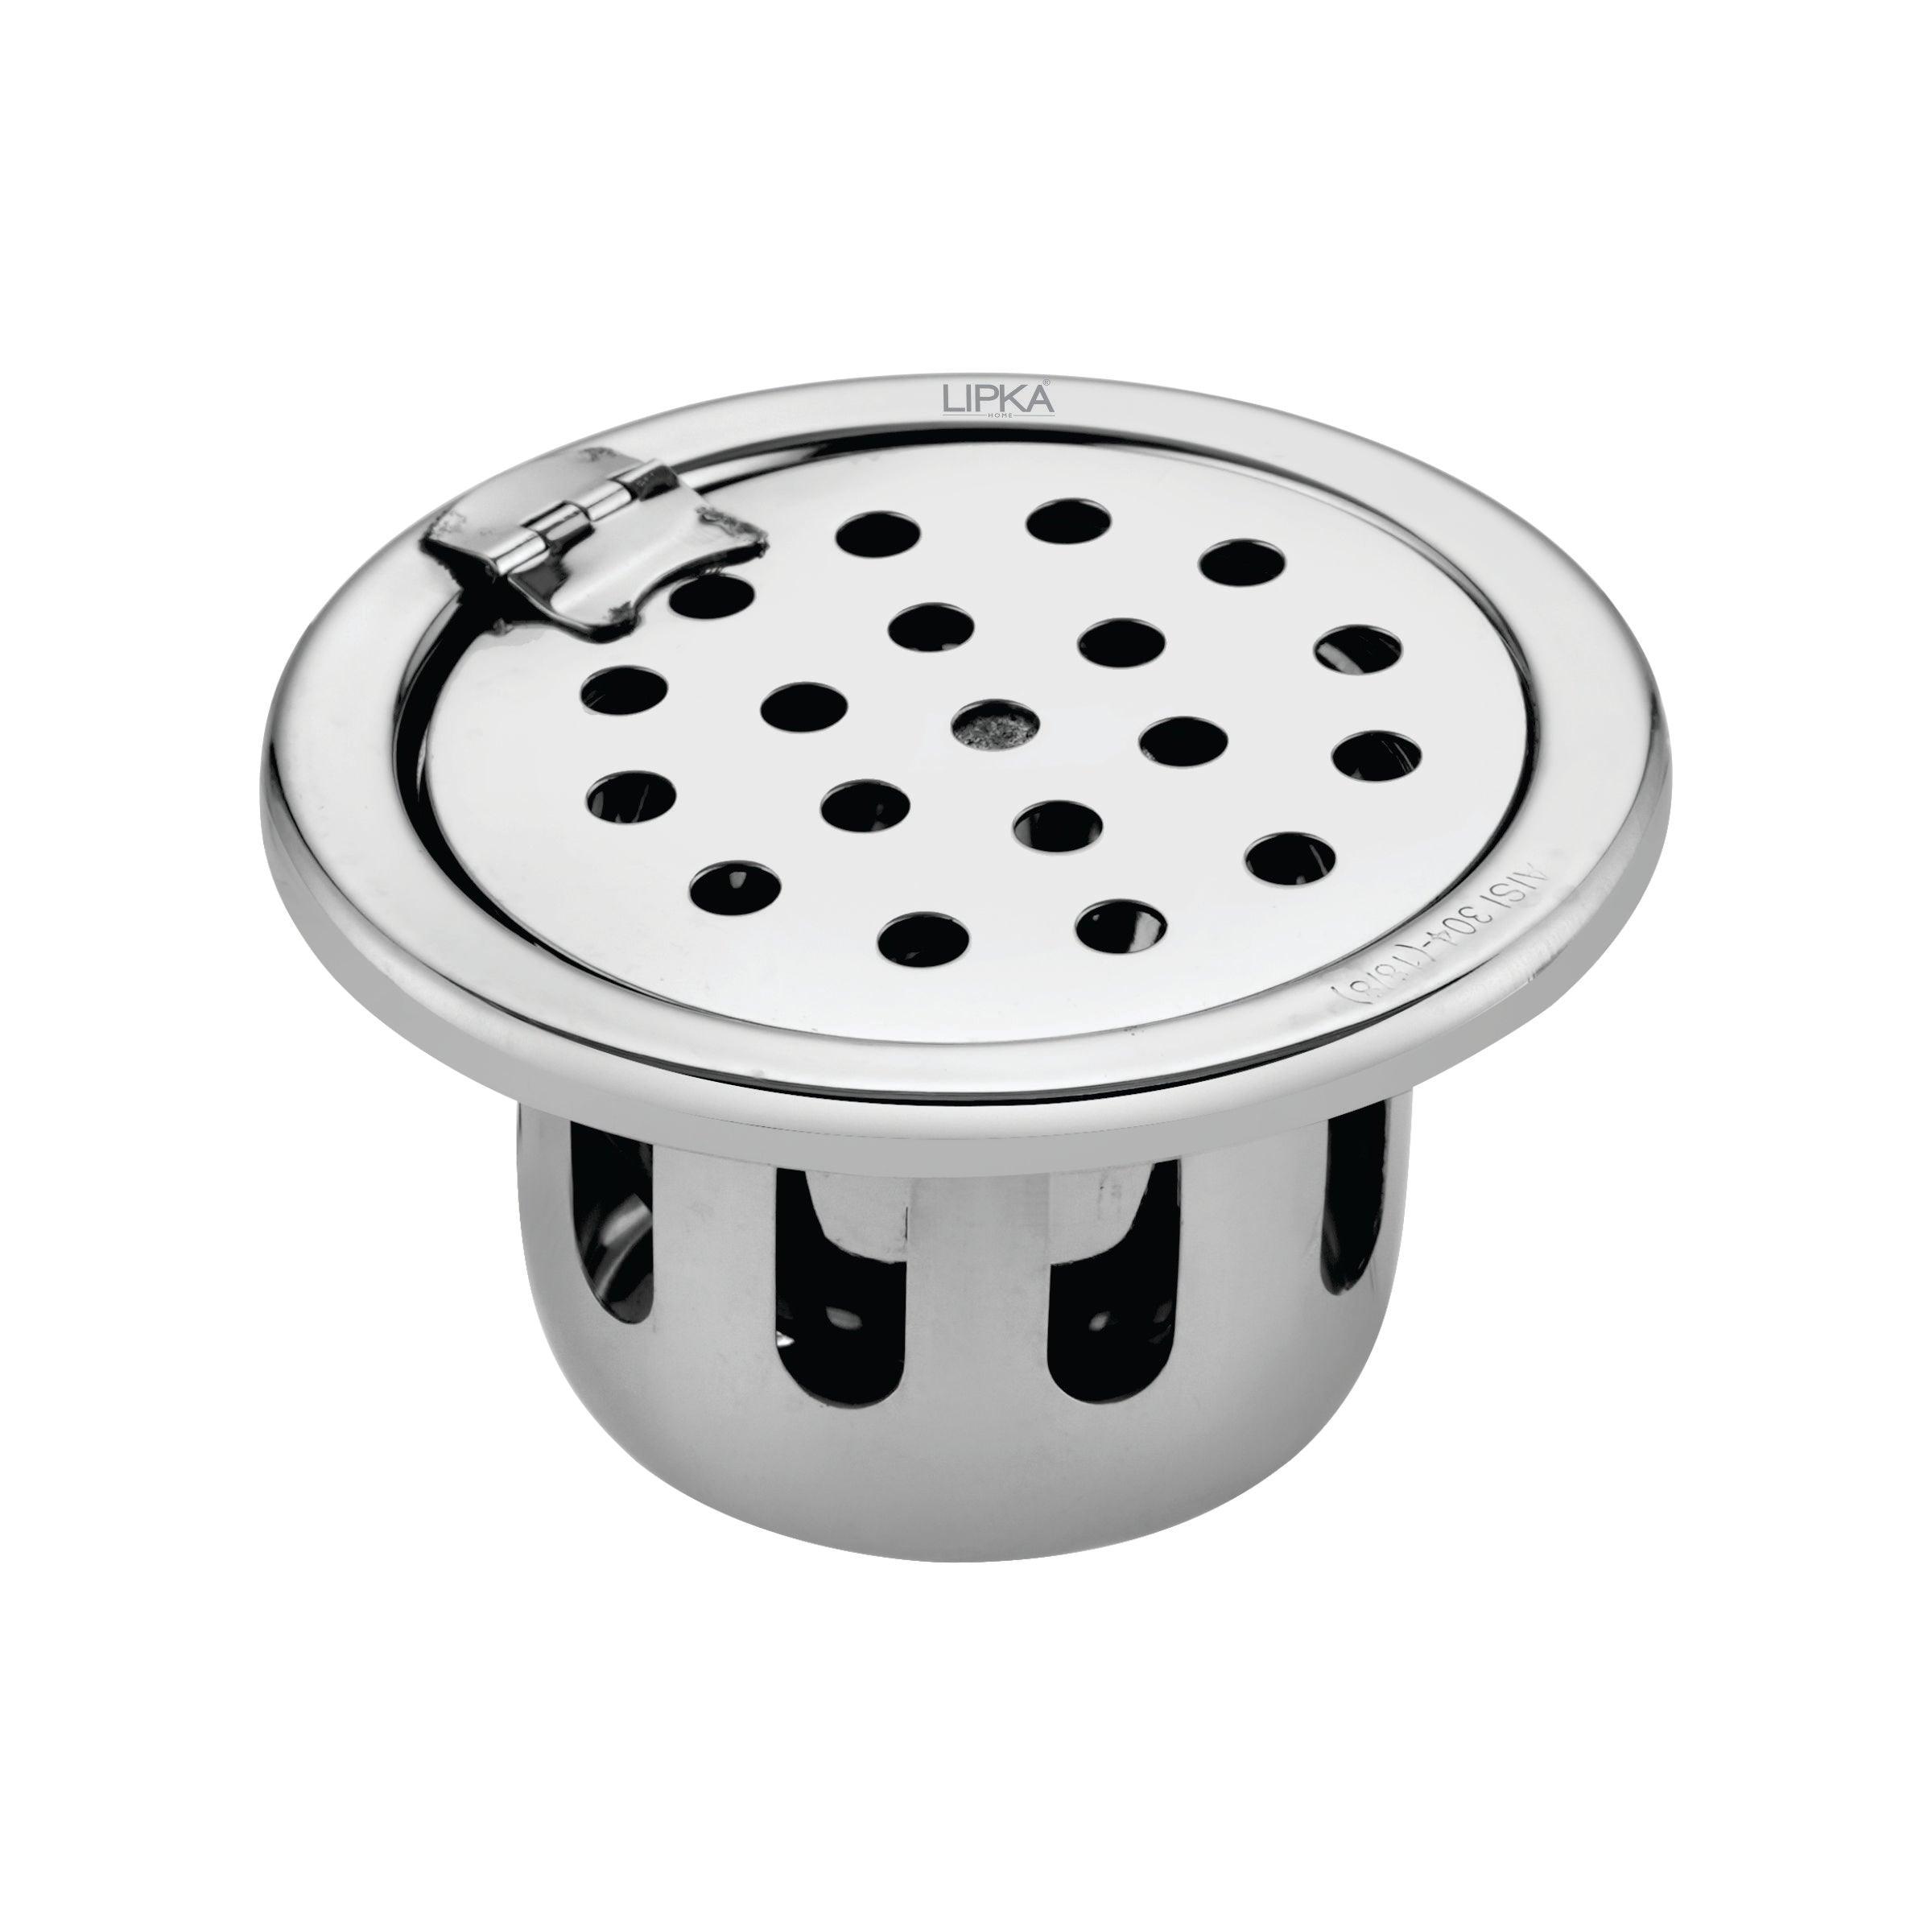 Round Floor Drain (4 inches) with Hinge & Cockroach Trap - LIPKA - Lipka Home